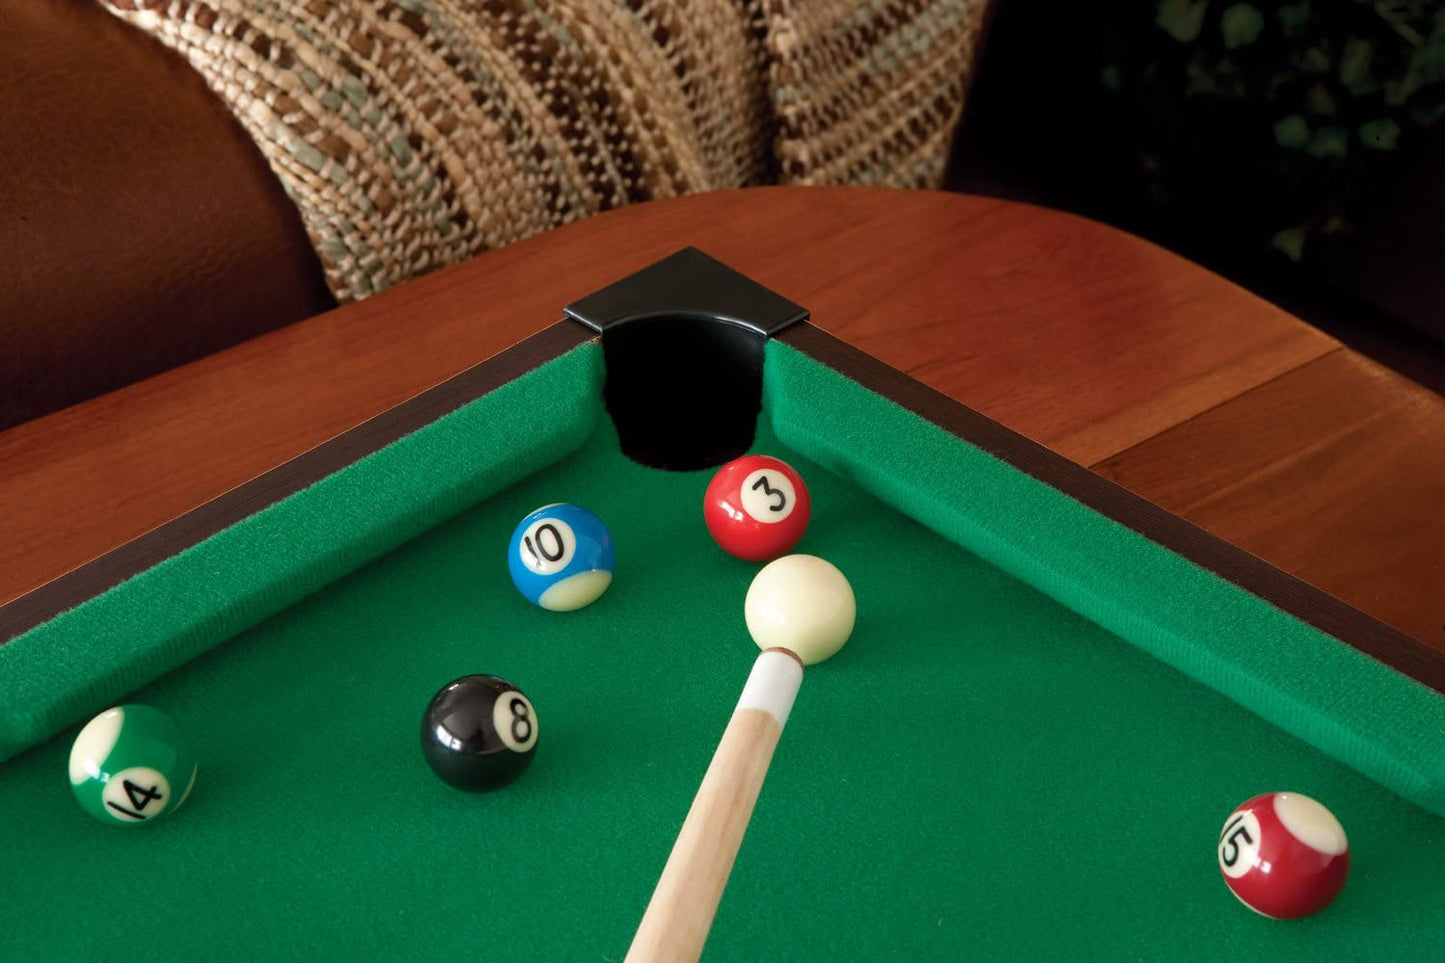 A close up view of a billiard cue stick aiming to sink a red ball 3 into a corner pocket. 